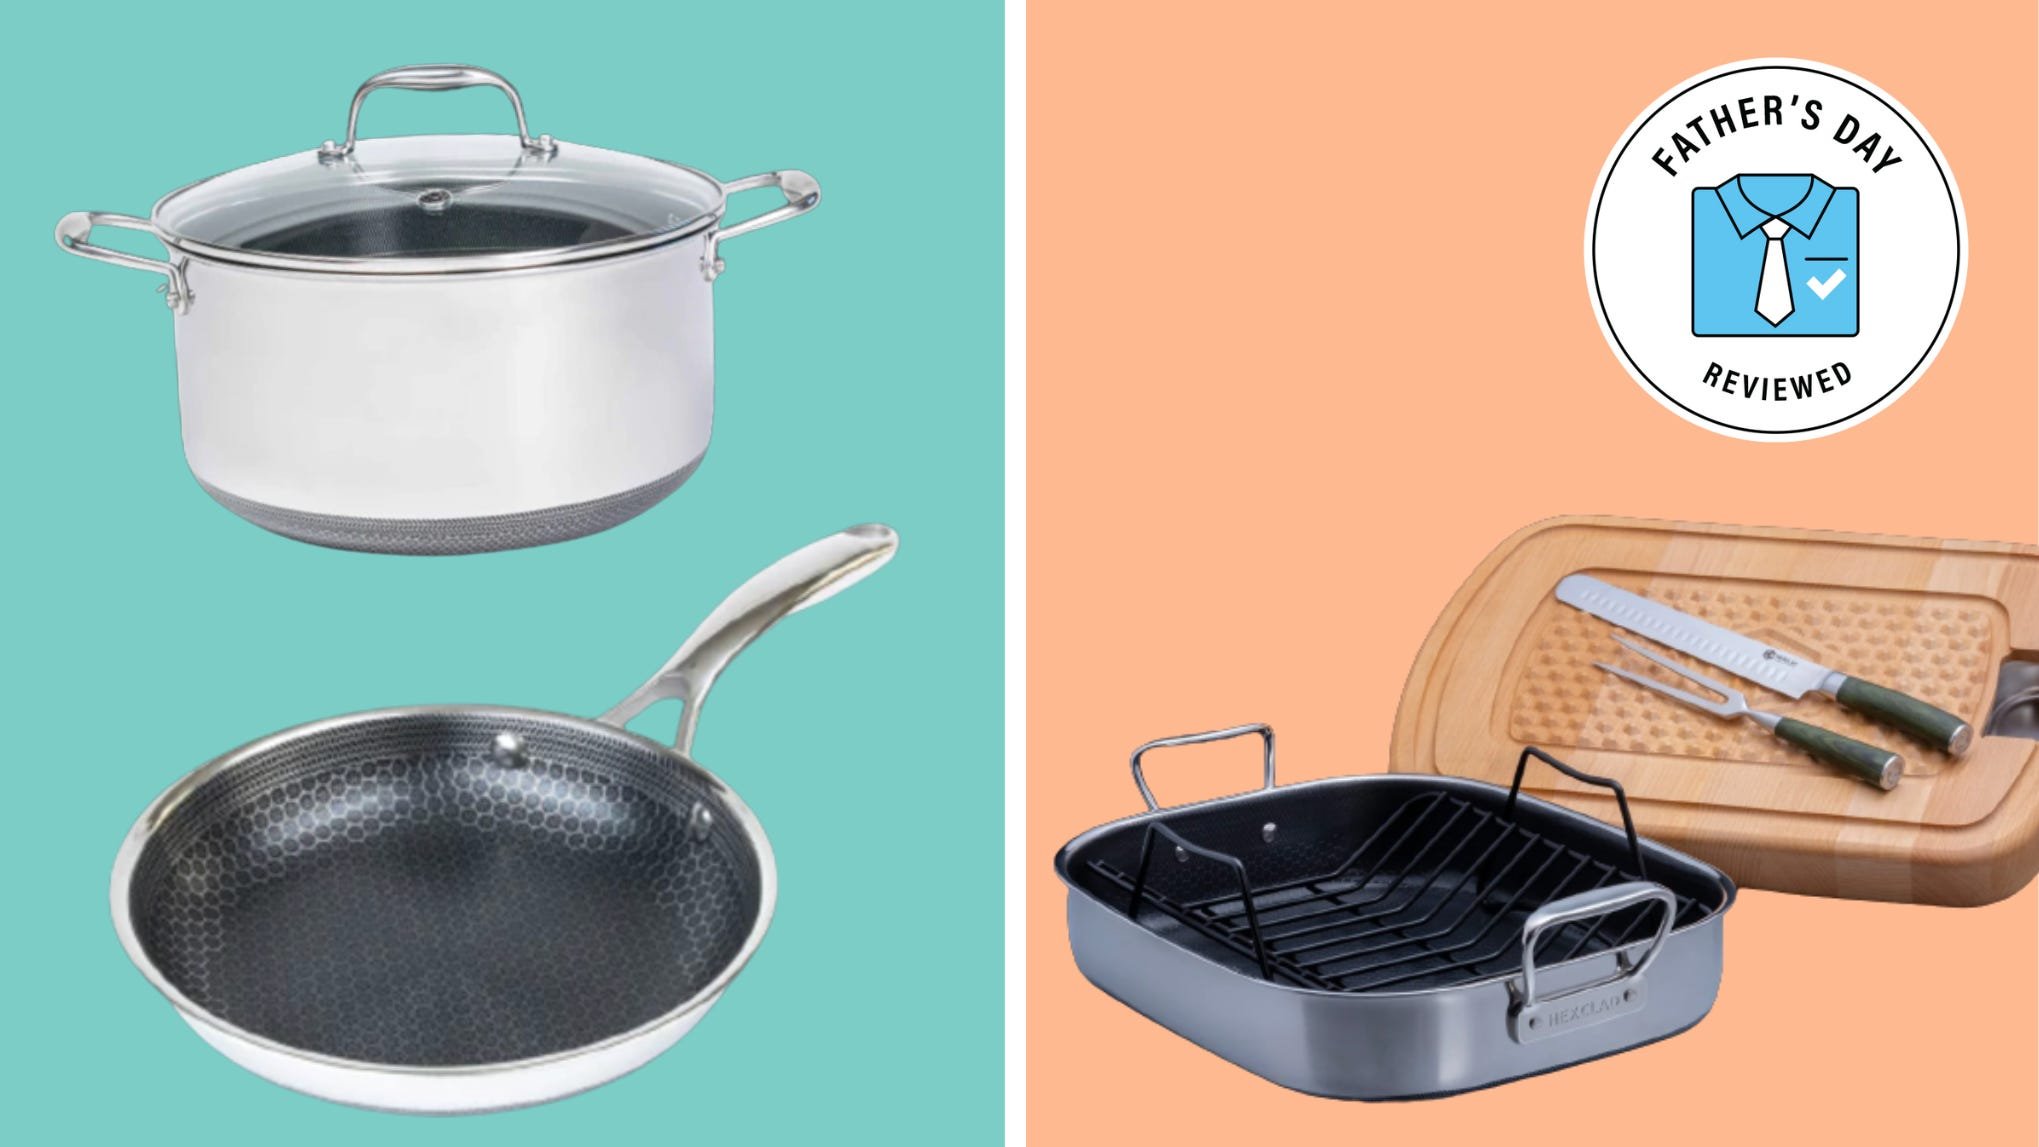 HexClad cookware is serving up tasty deals ahead of Father's Day 2023